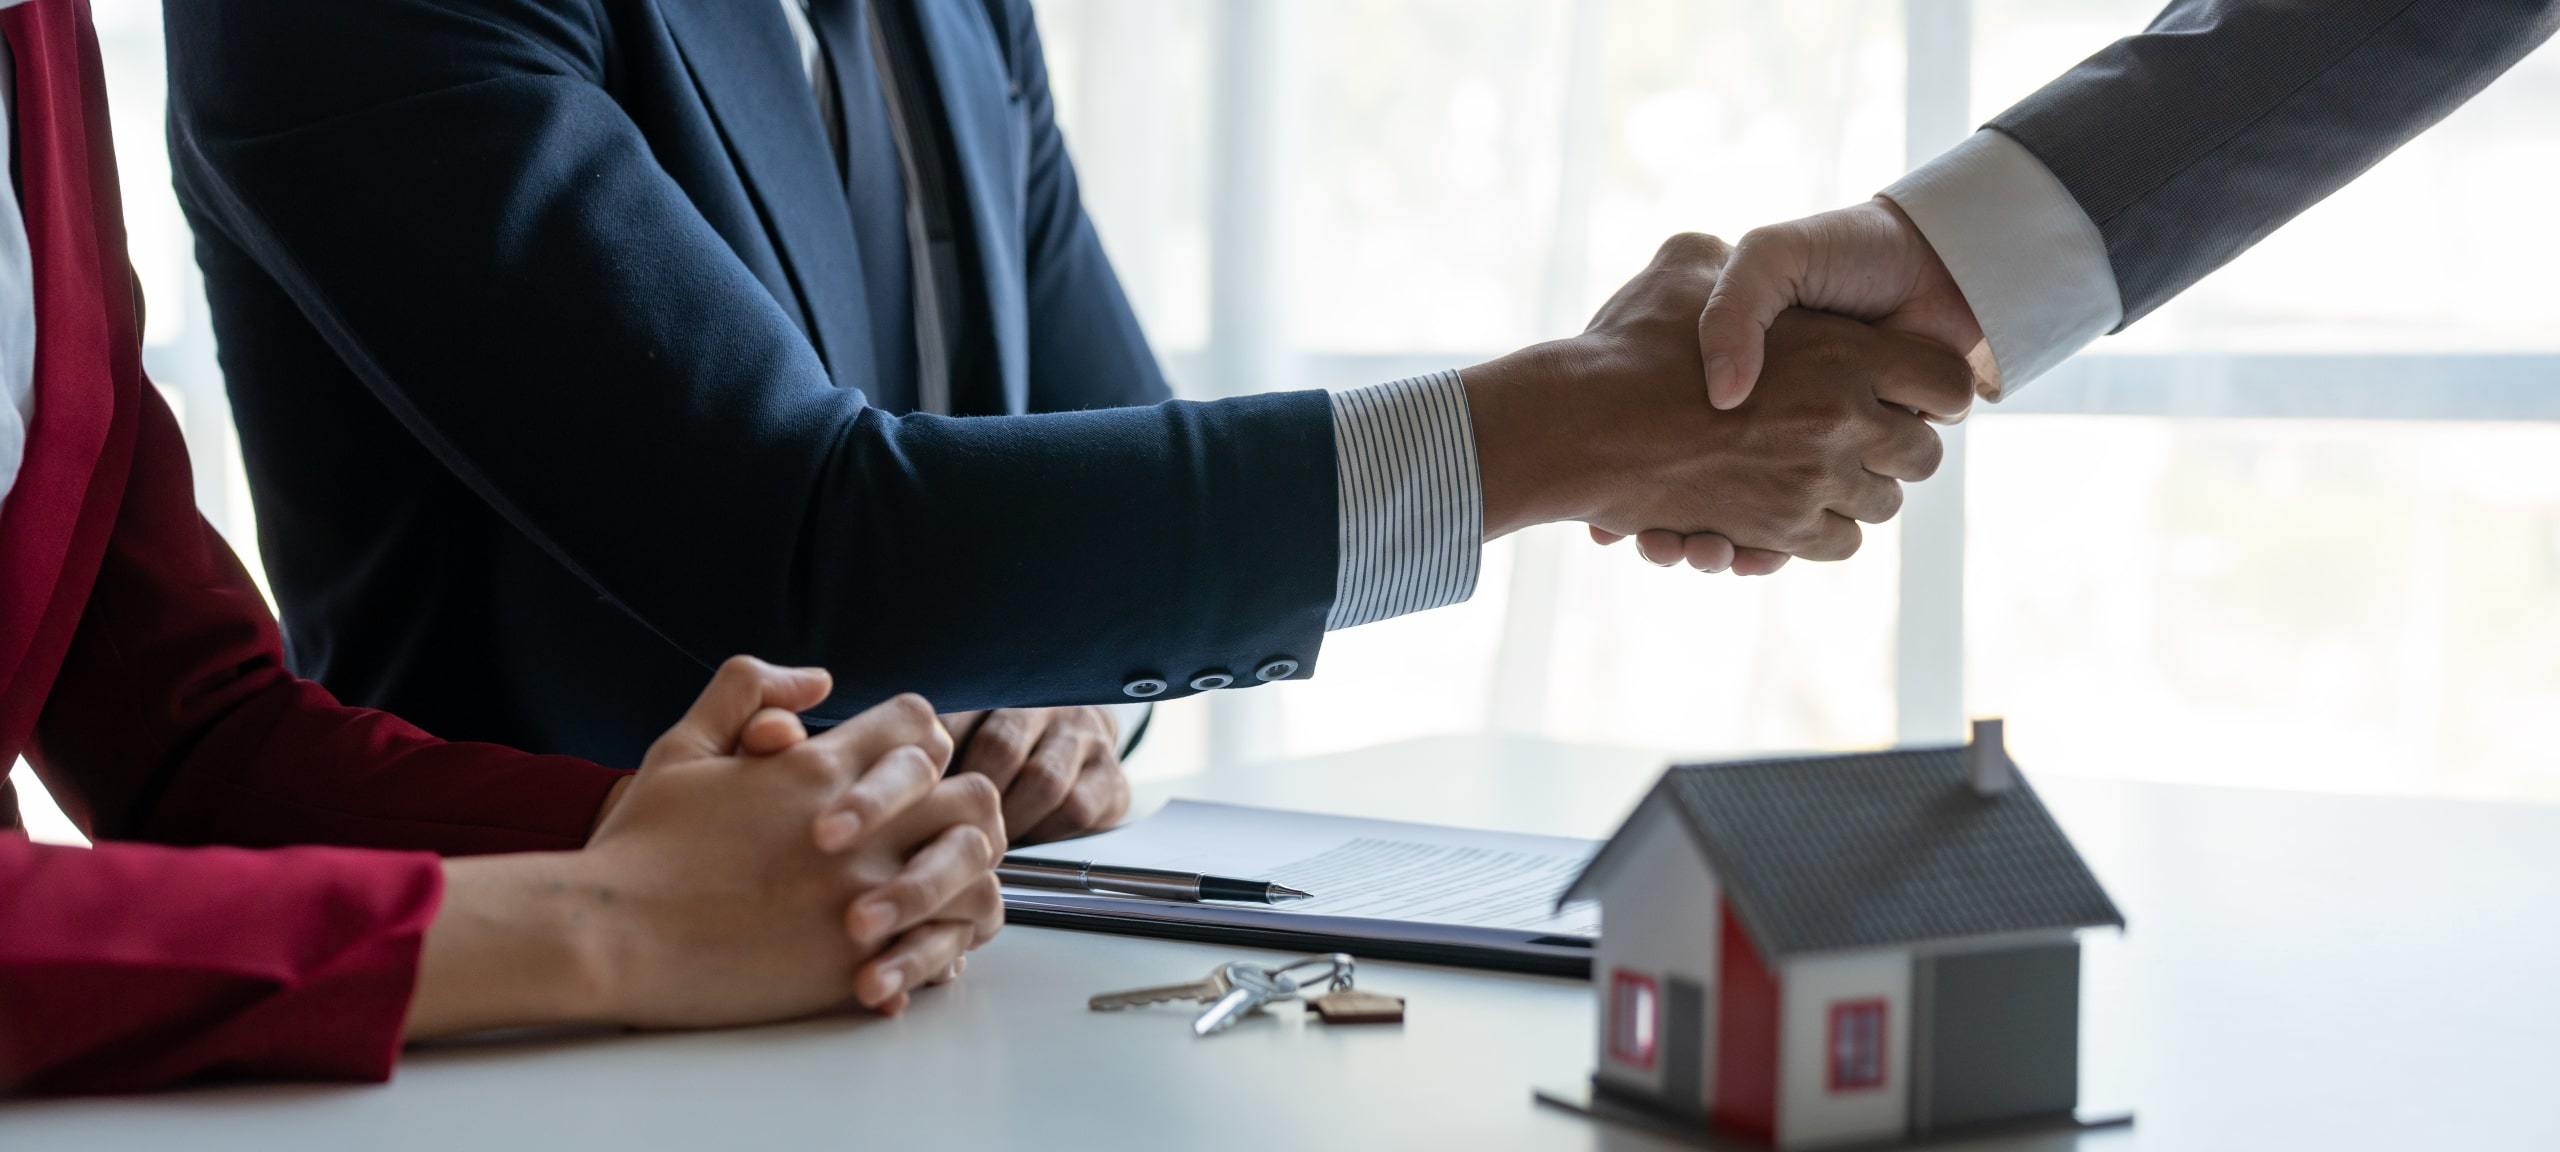 Realtors shaking hands with client over completed deal